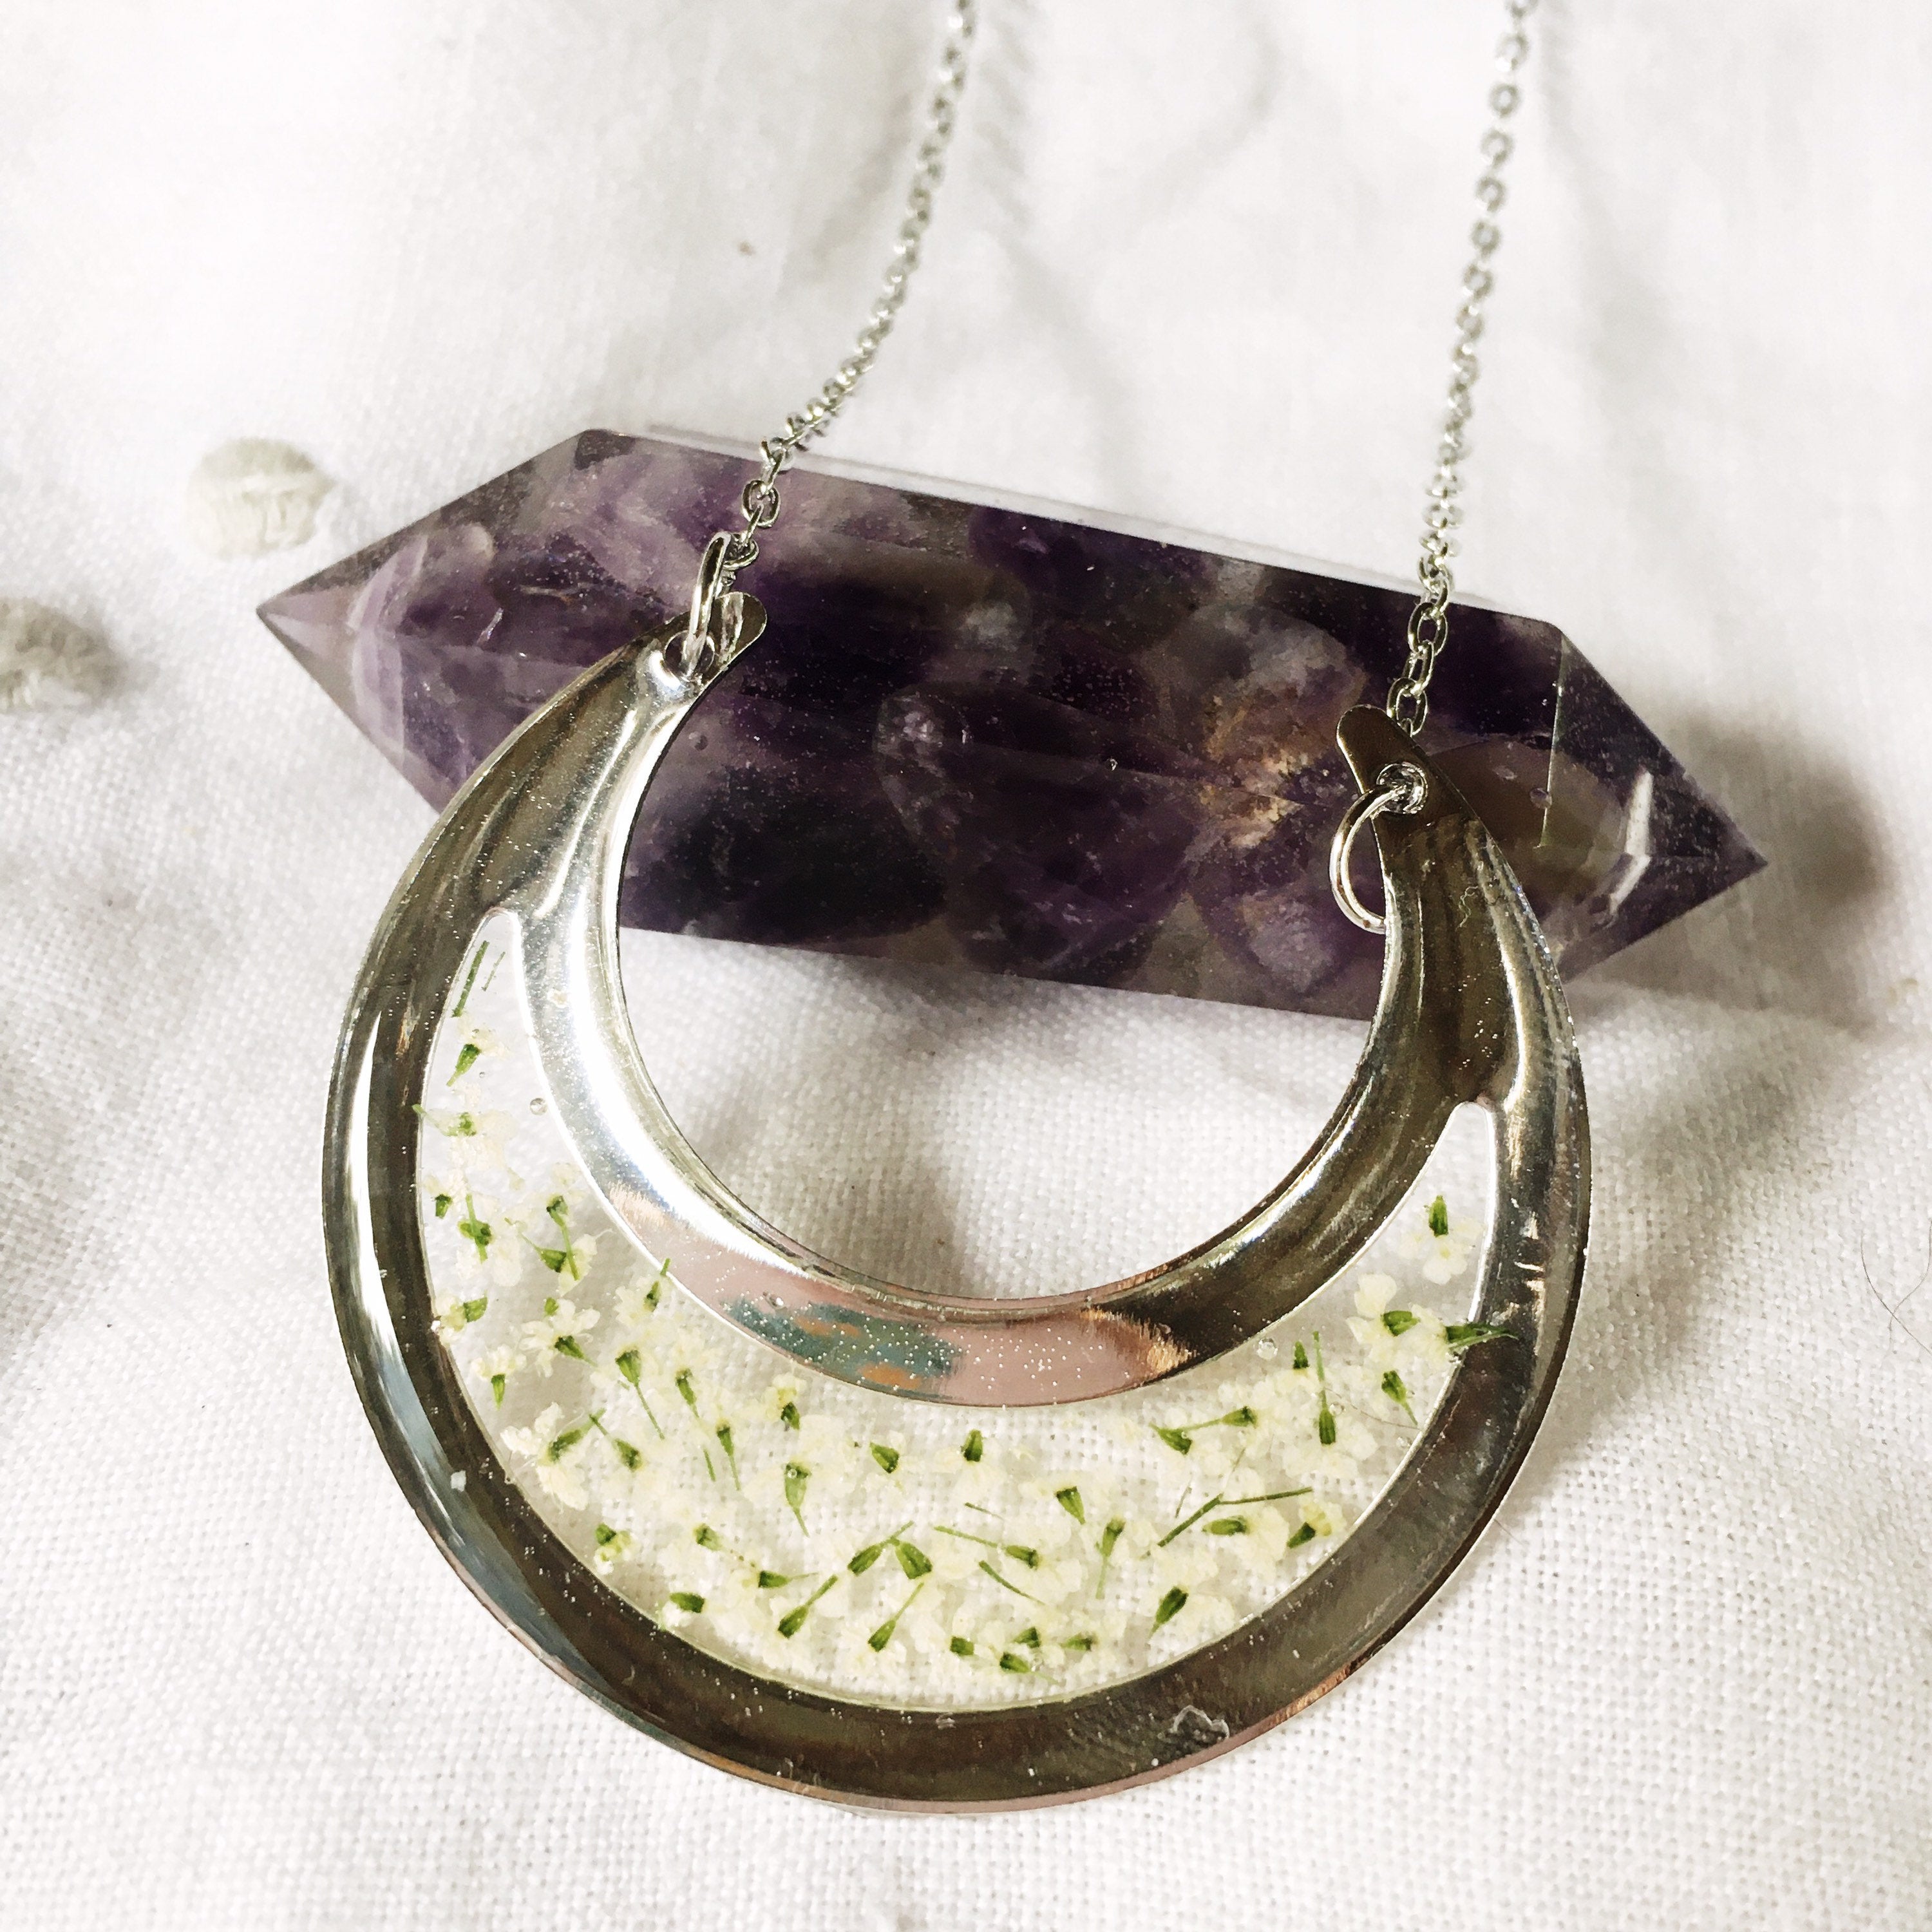 Crescent City Chic - Silver Crescent Moon Necklace with Queen Anne's Lace